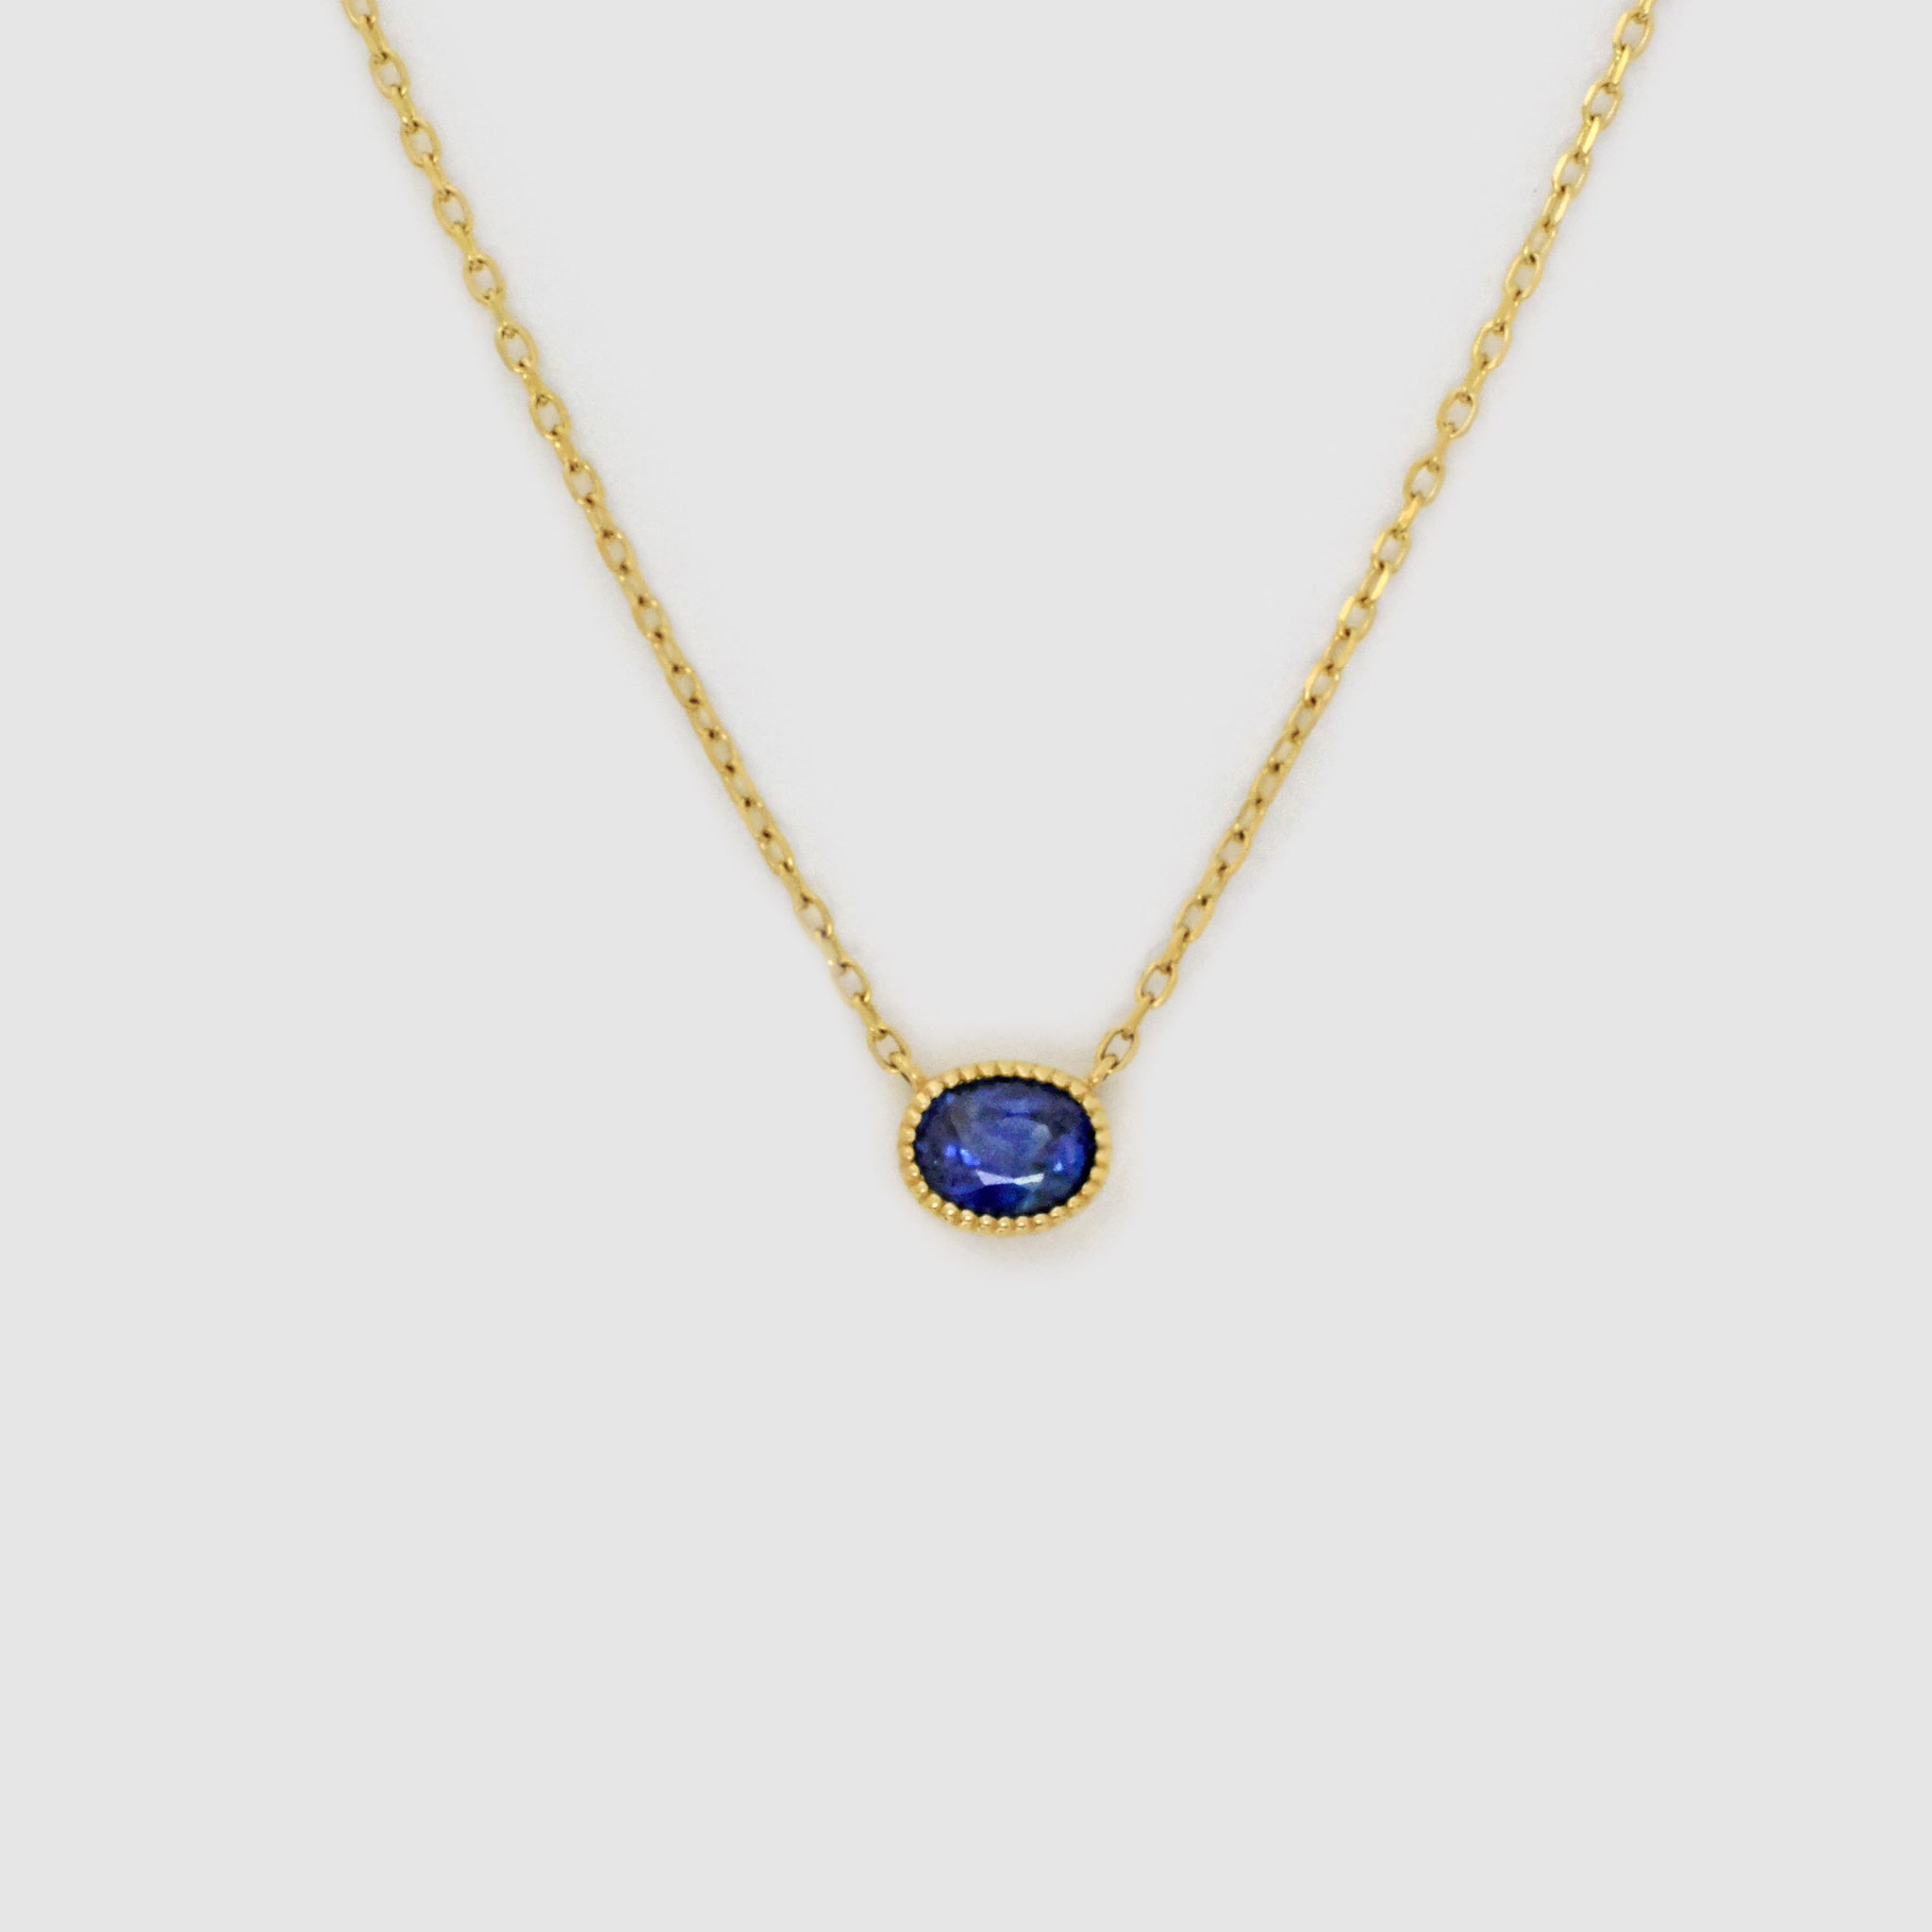 Oval Sapphire Necklace, 18k solid gold